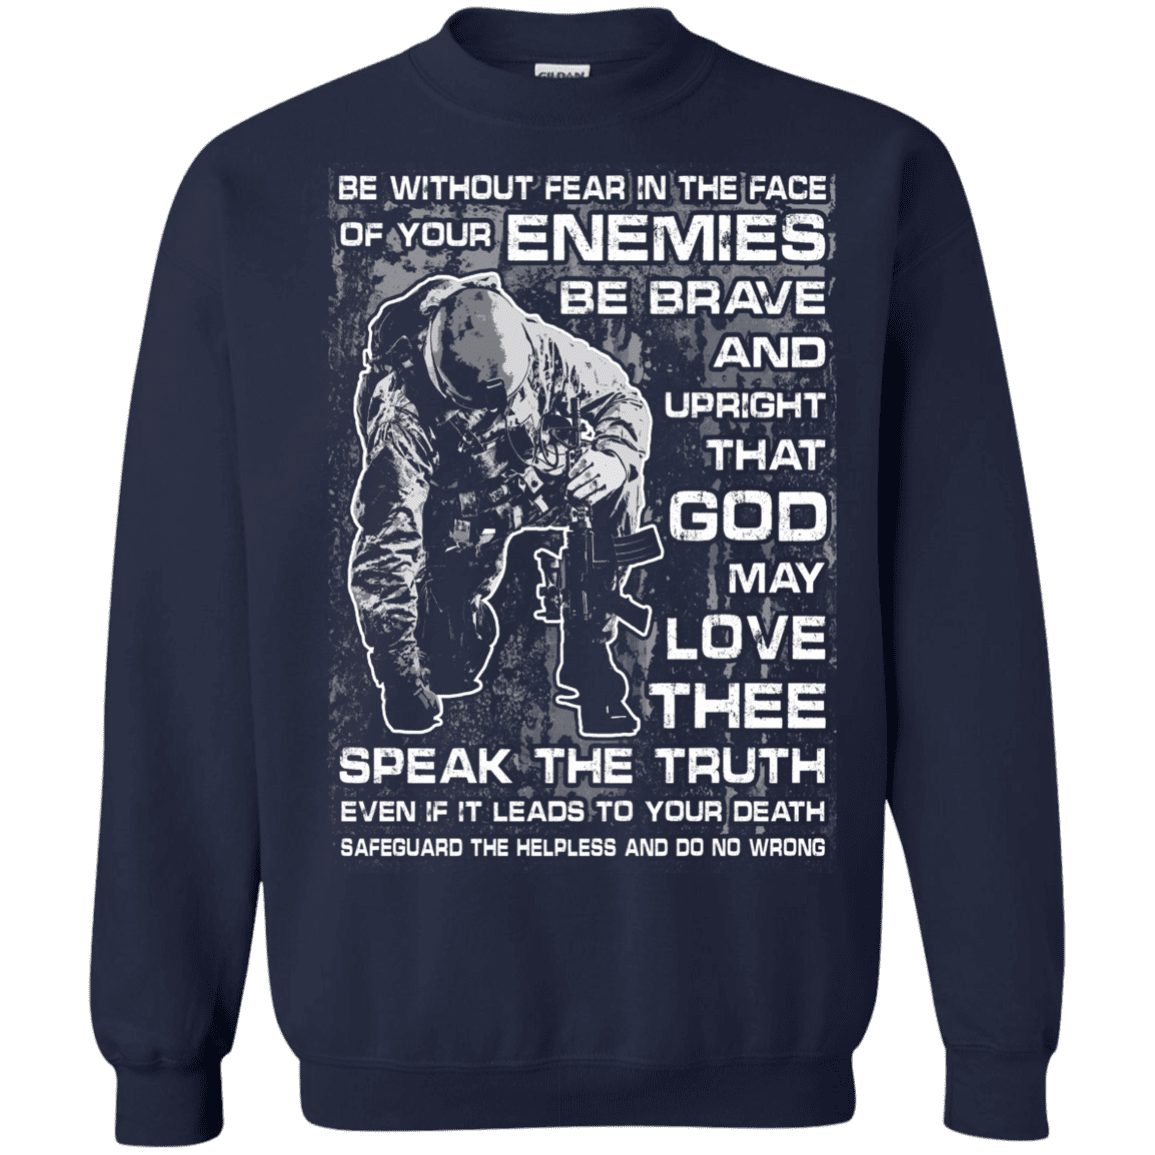 Military T-Shirt "Be without Fear in The Face Men" Front-TShirt-General-Veterans Nation